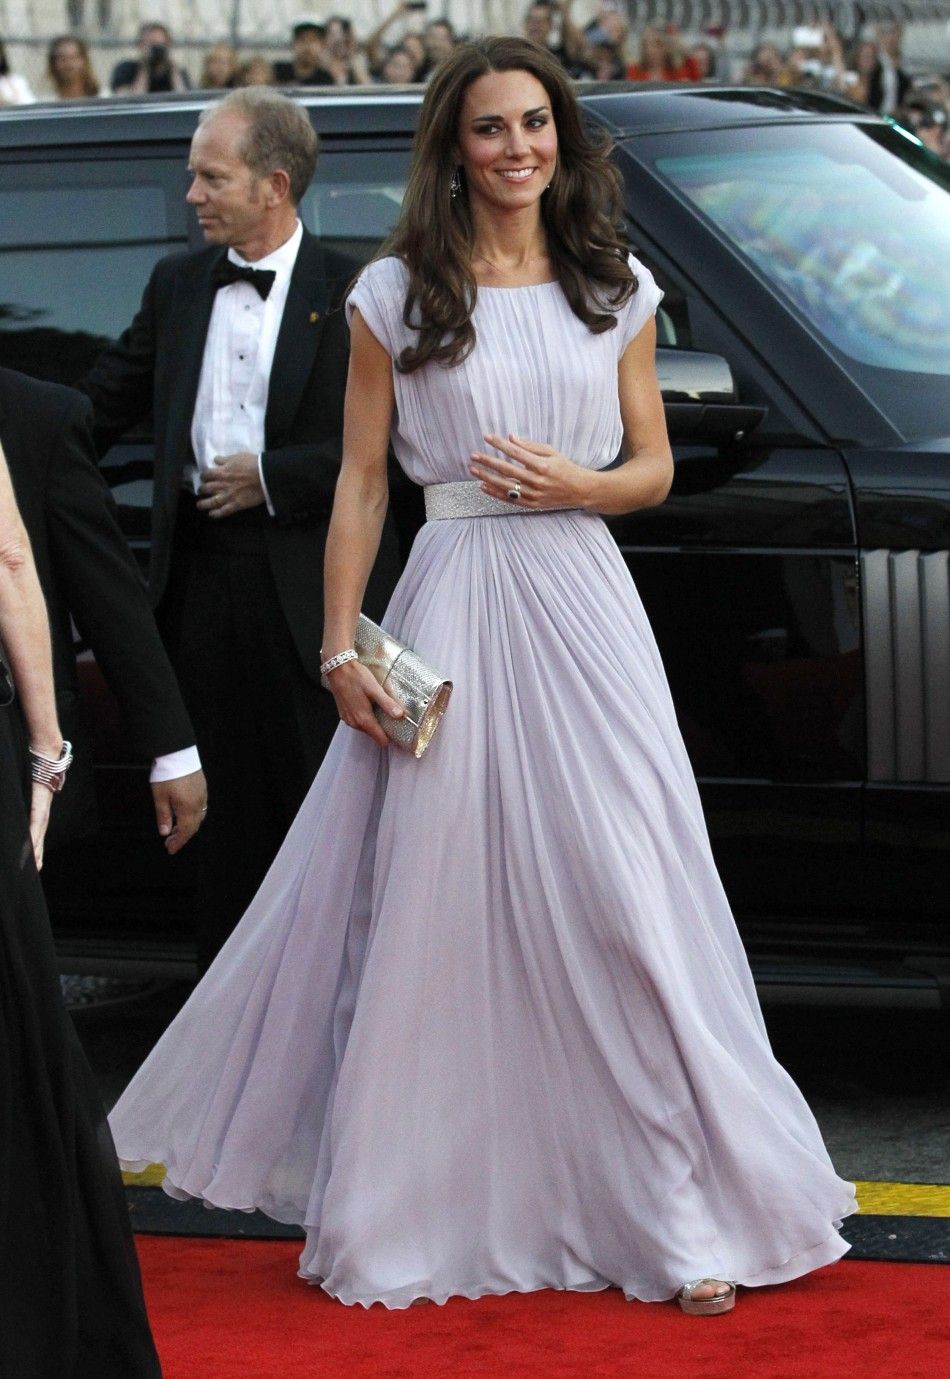 Kate Middleton in Alexander McQueen gown and Jimmy Choo heels